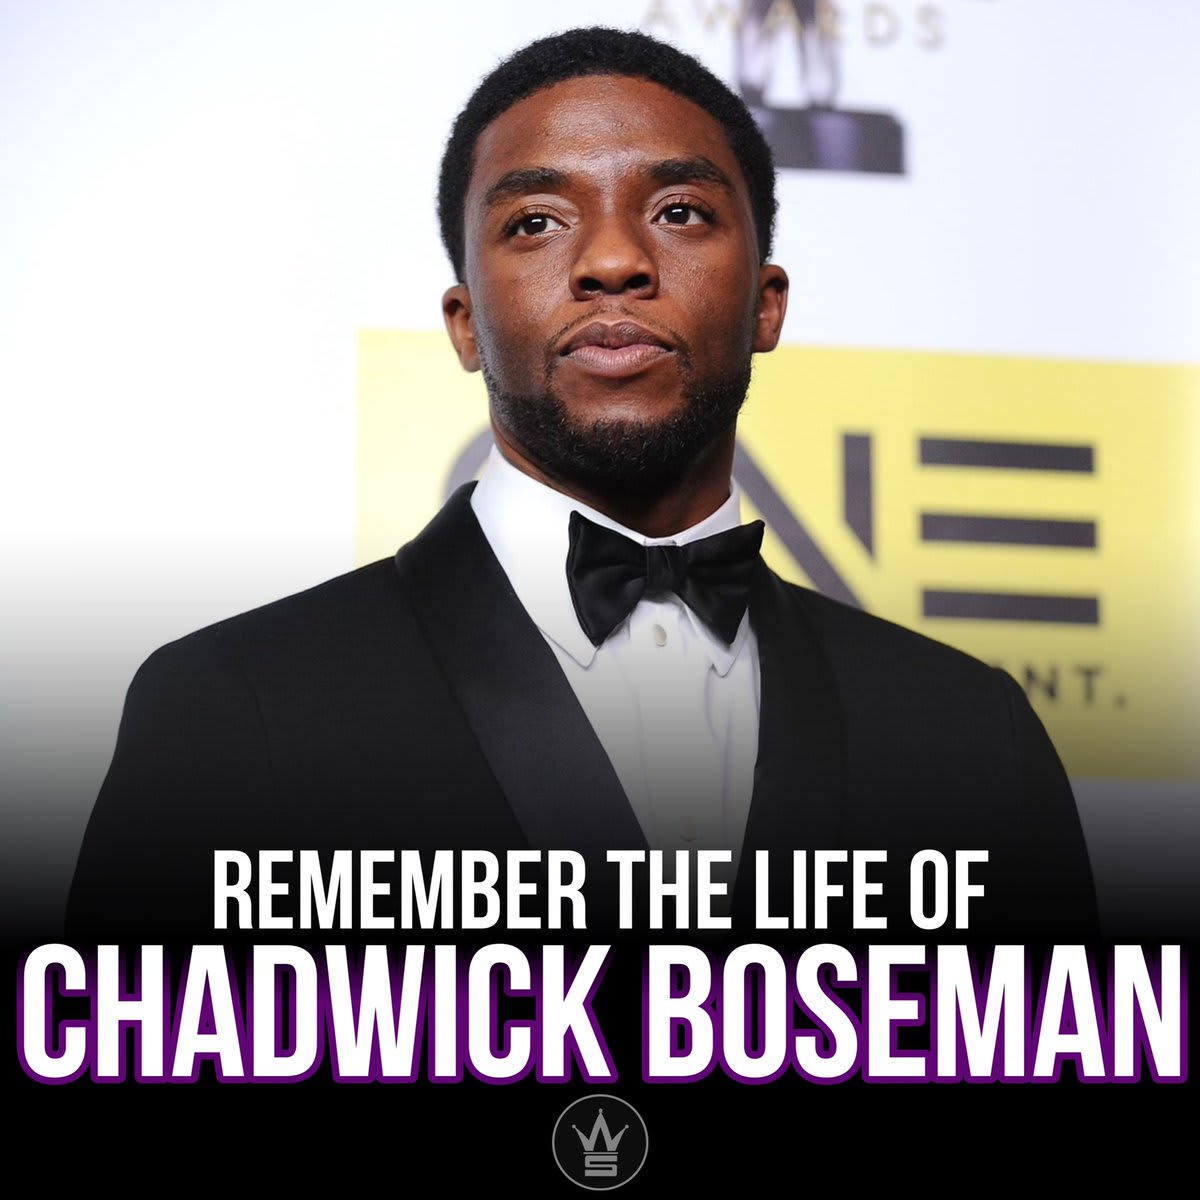 Today marks 2 years since the passing of #ChadwickBoseman. Our thoughts and prayers continue to be with this family and friends. RIPChadwickBoseman 🙏